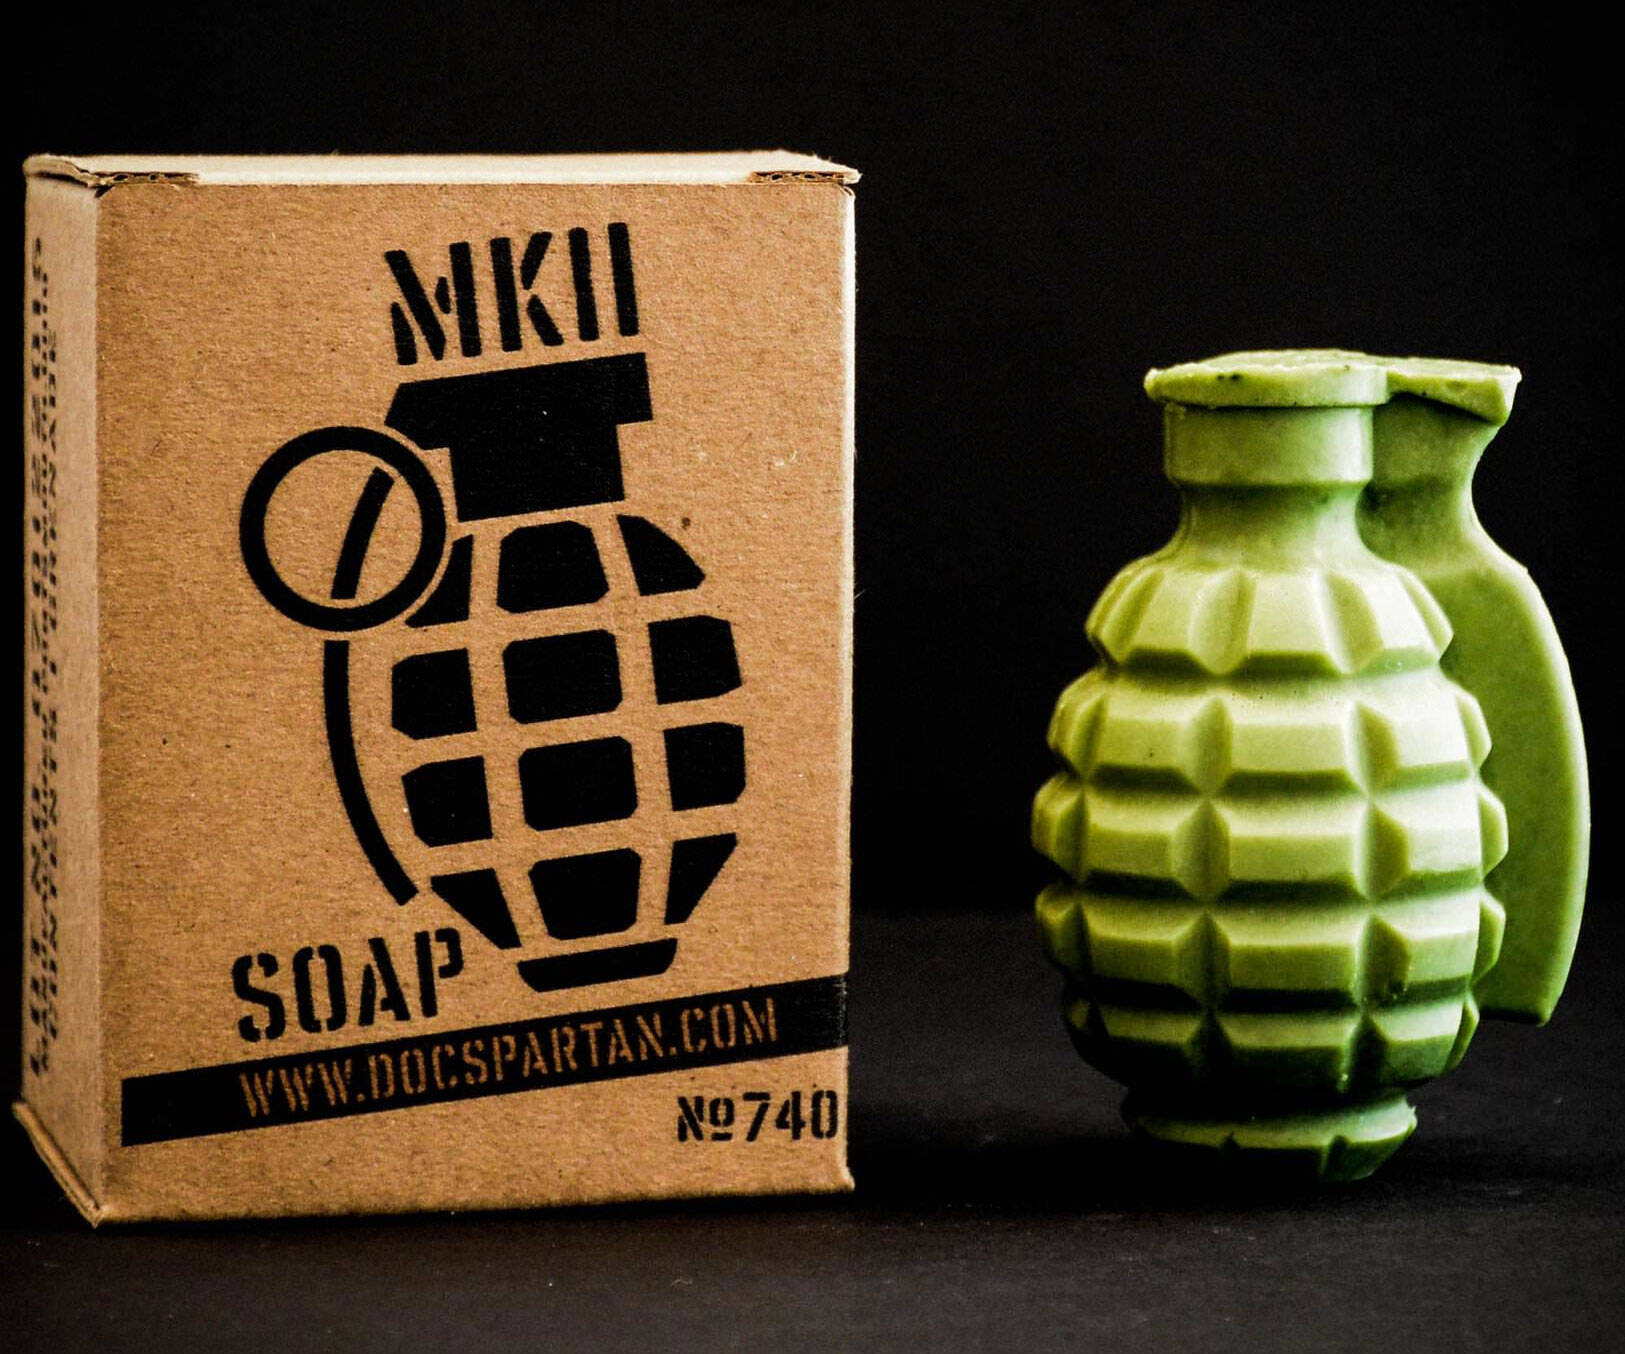 Grenade Soap - coolthings.us